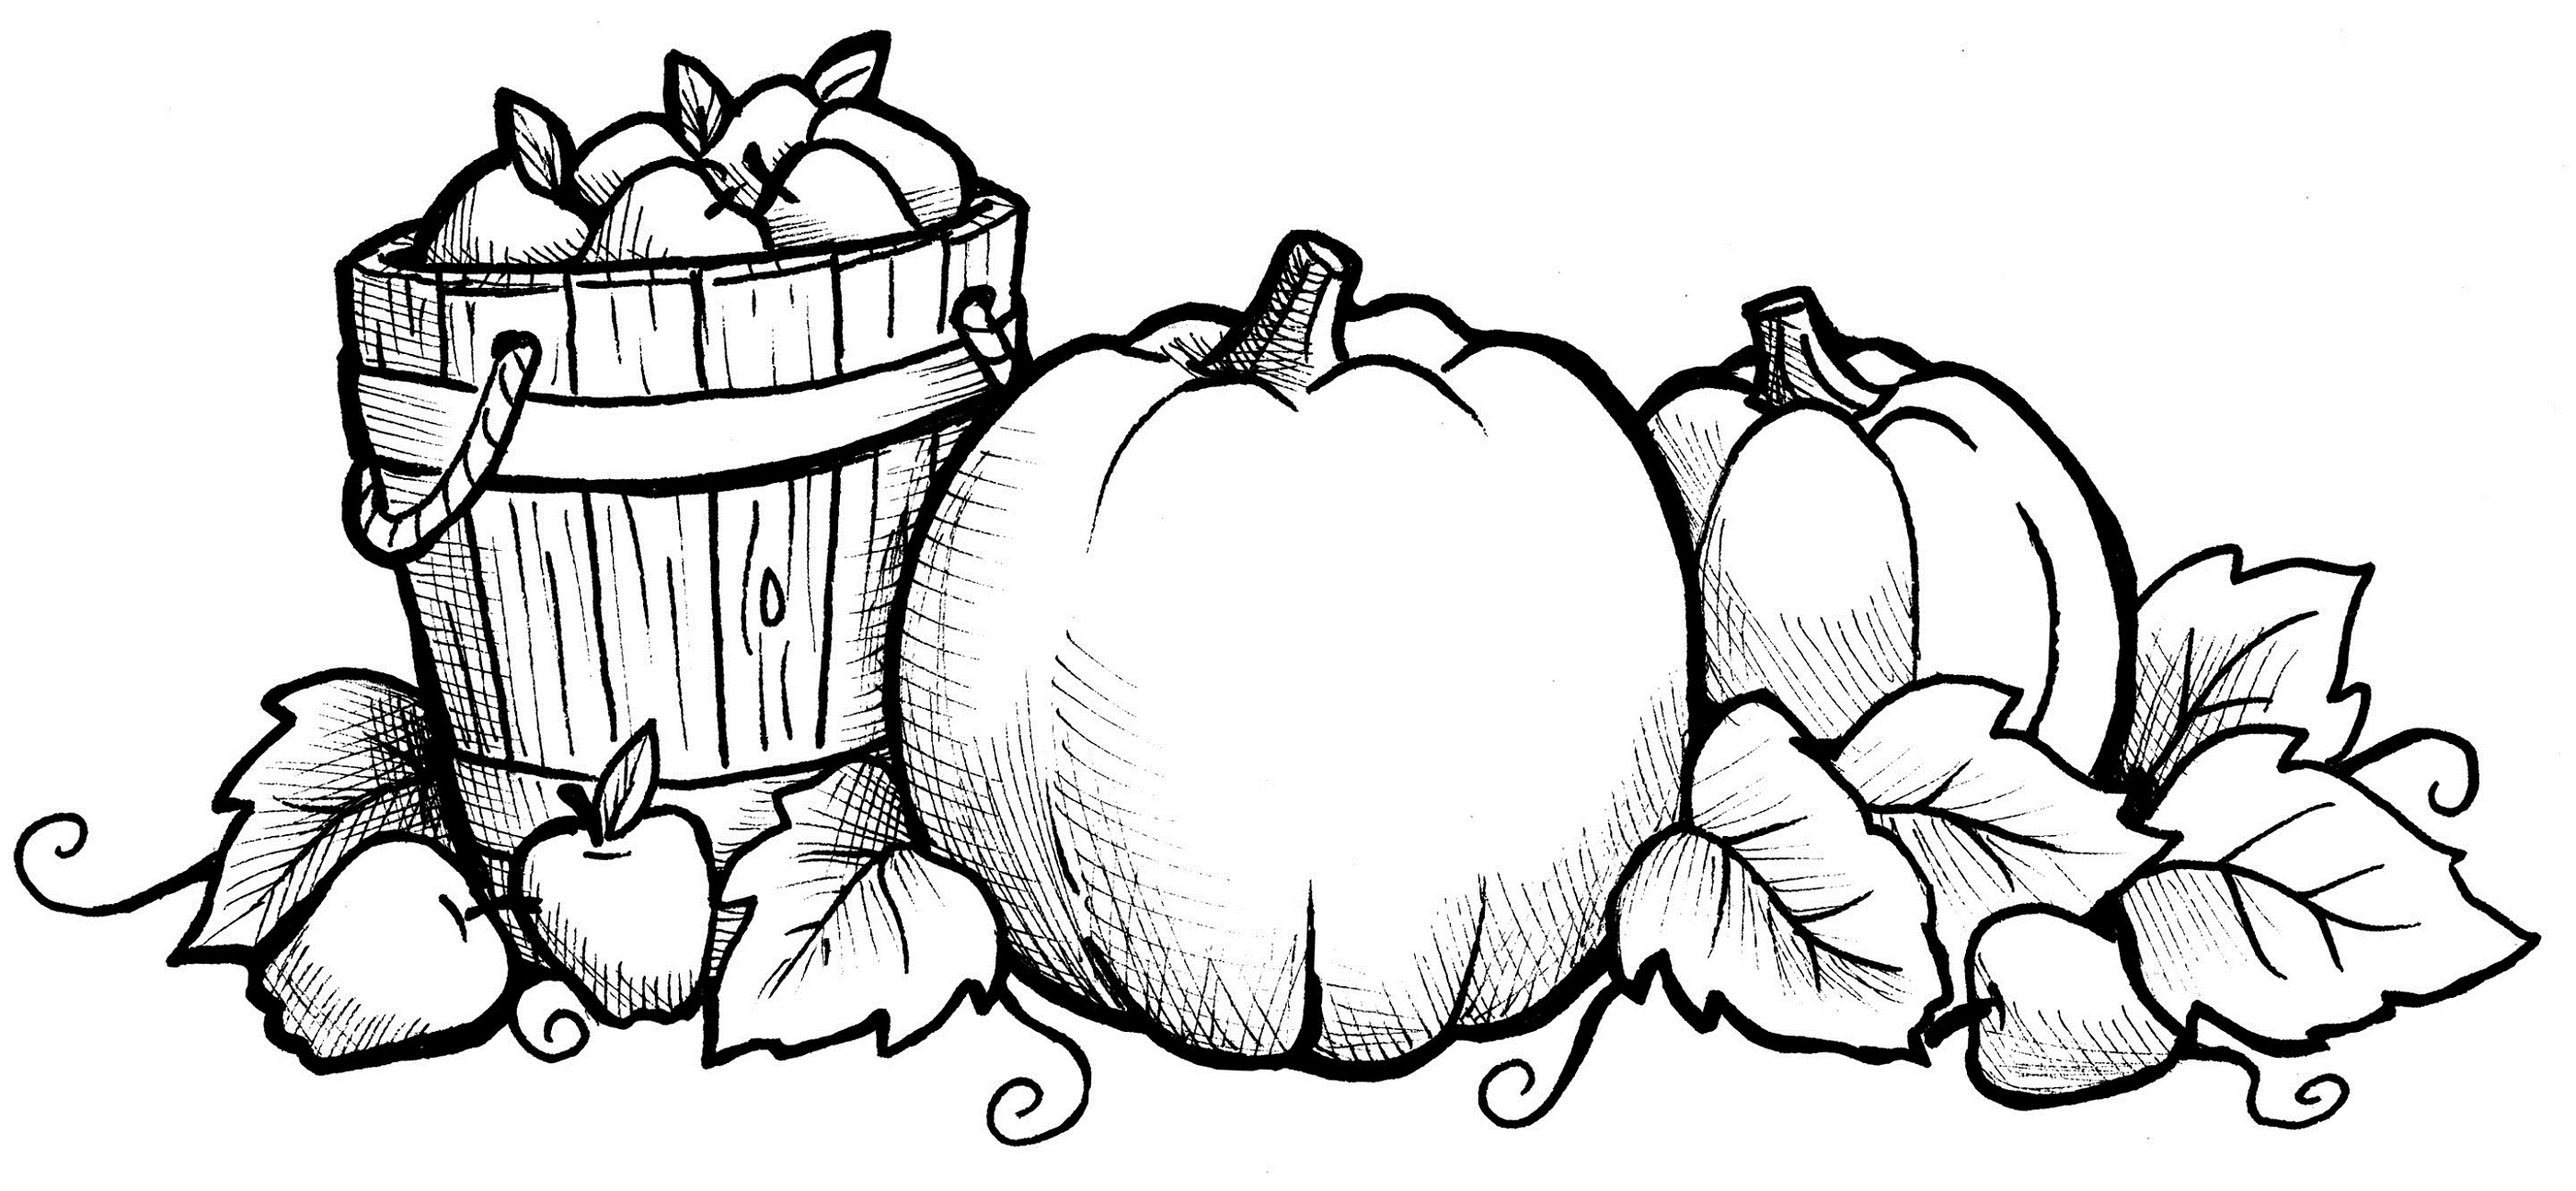 fall holiday coloring pages